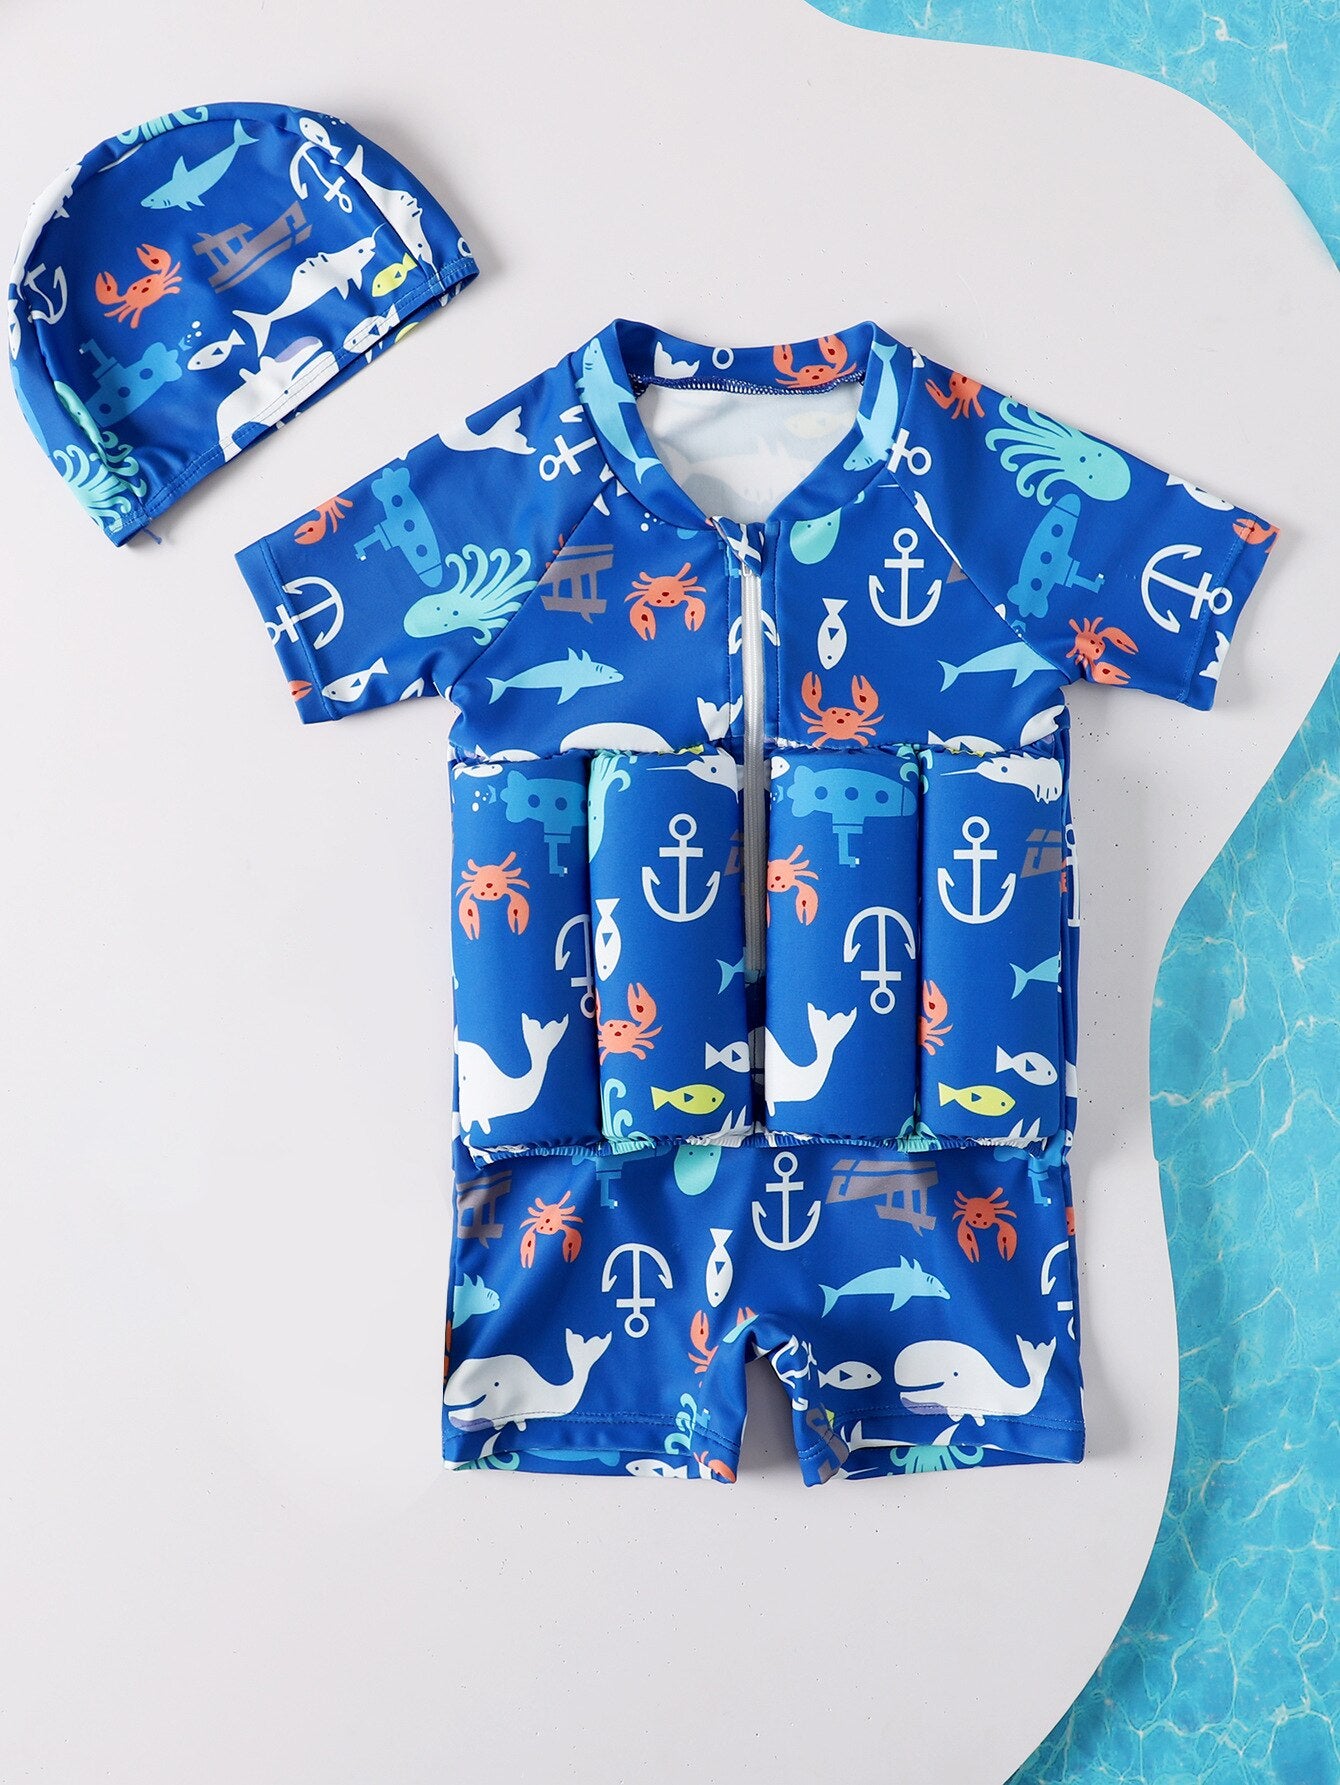 Kids Boys  One-pieces Floating Print Summer Swimsuit